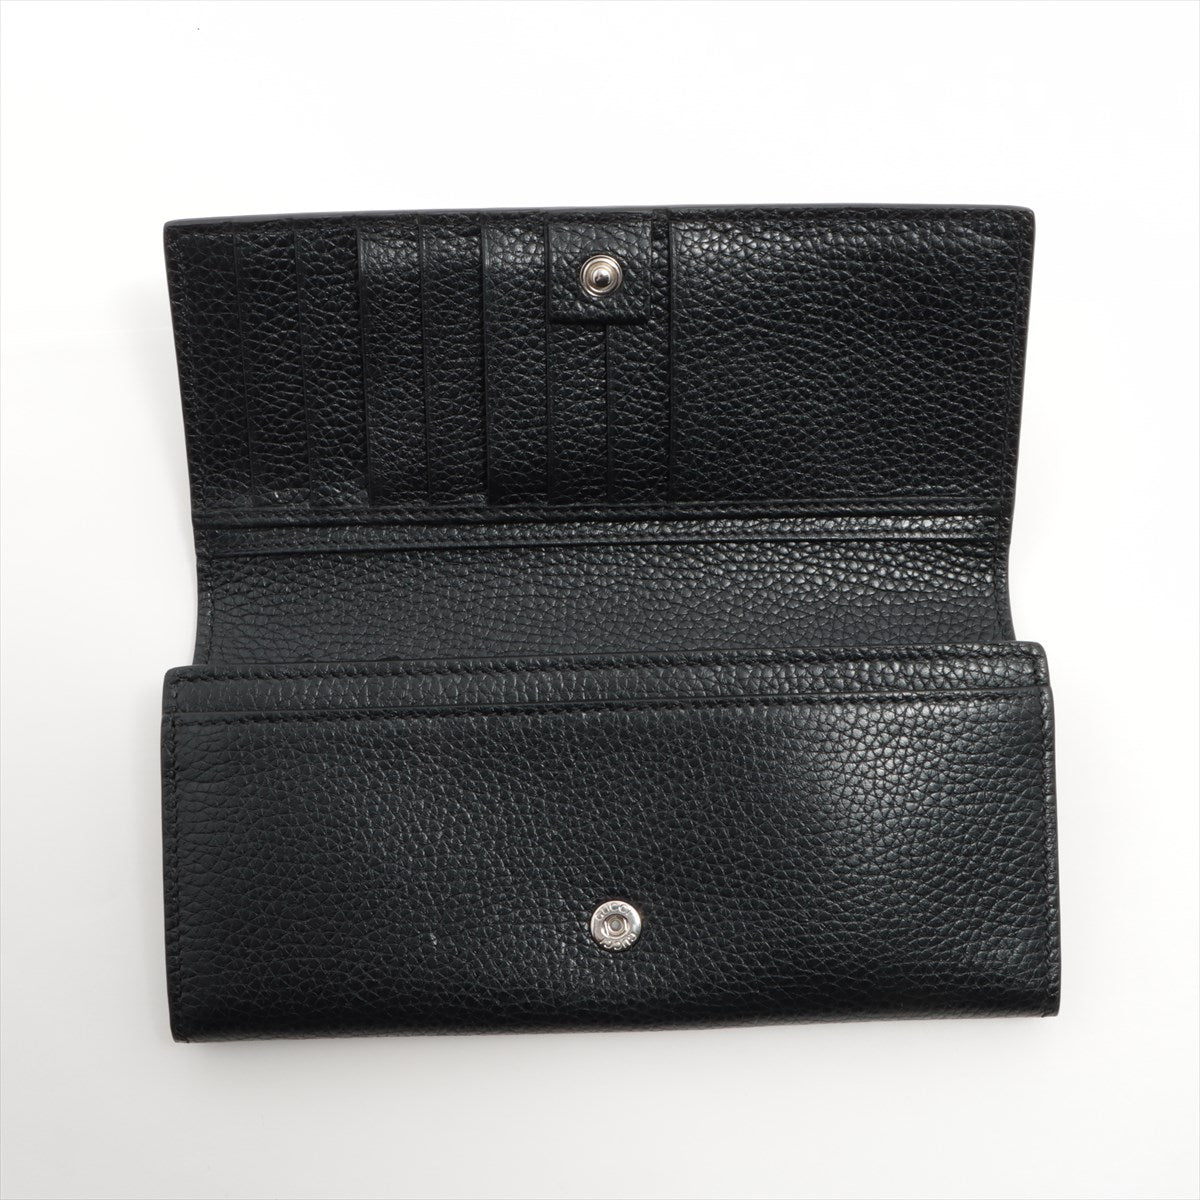 Gucci GG Icon 481727 Leather Wallet Black